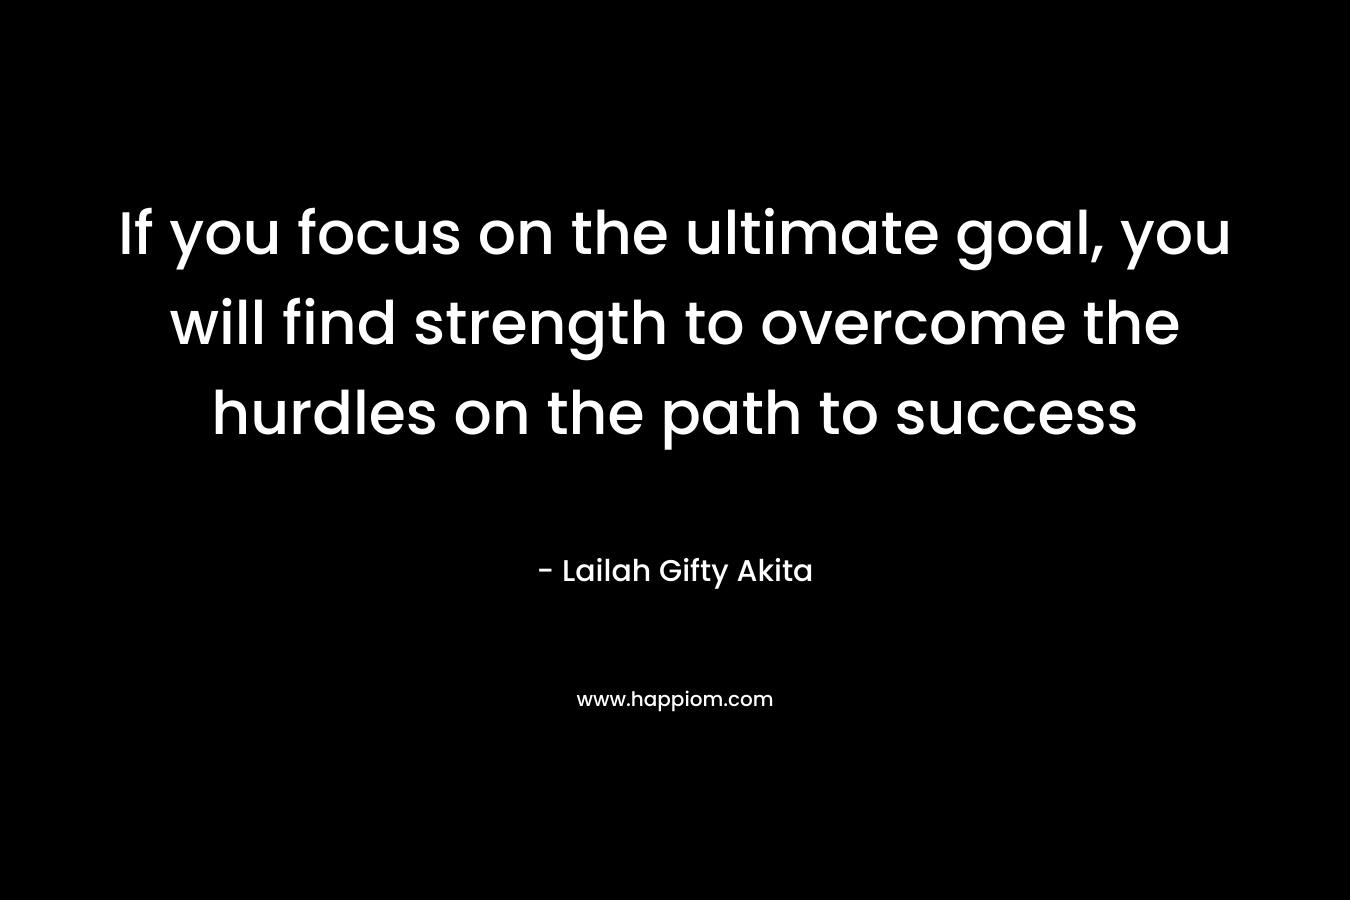 If you focus on the ultimate goal, you will find strength to overcome the hurdles on the path to success